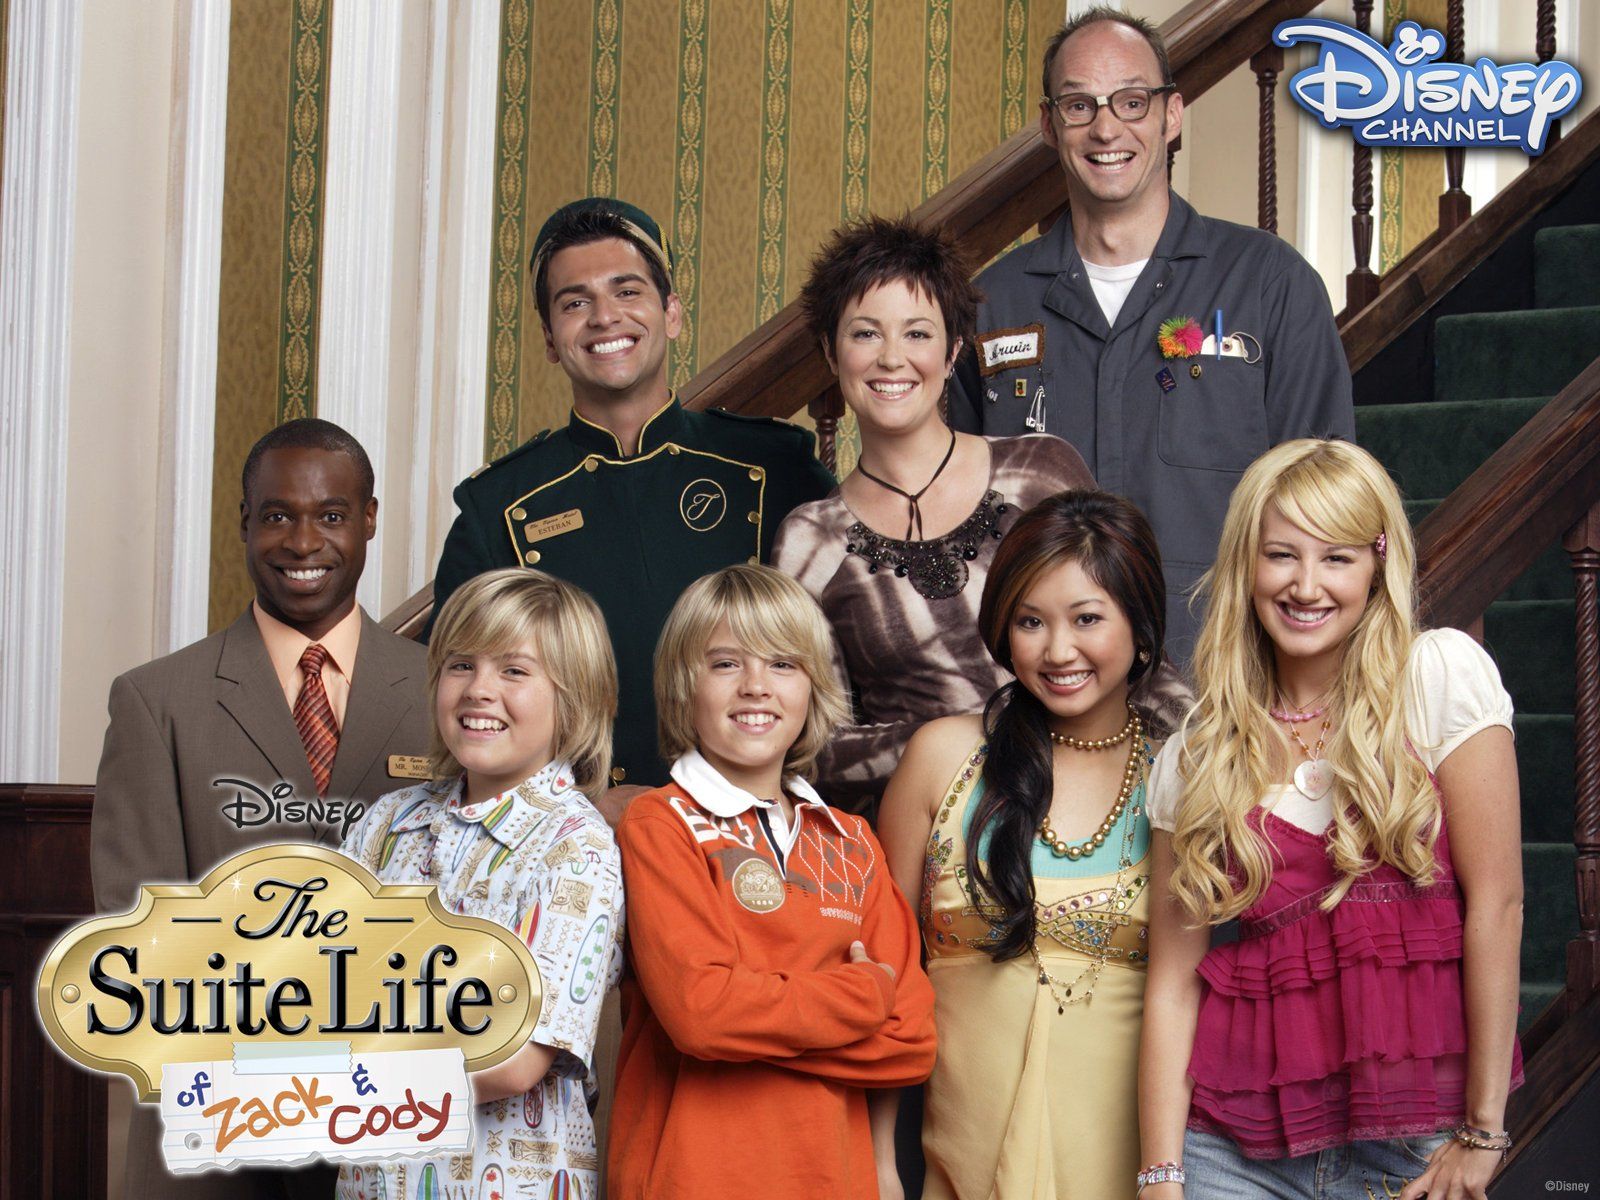 Watch The Suite Life of Zack & Cody Volume 6.